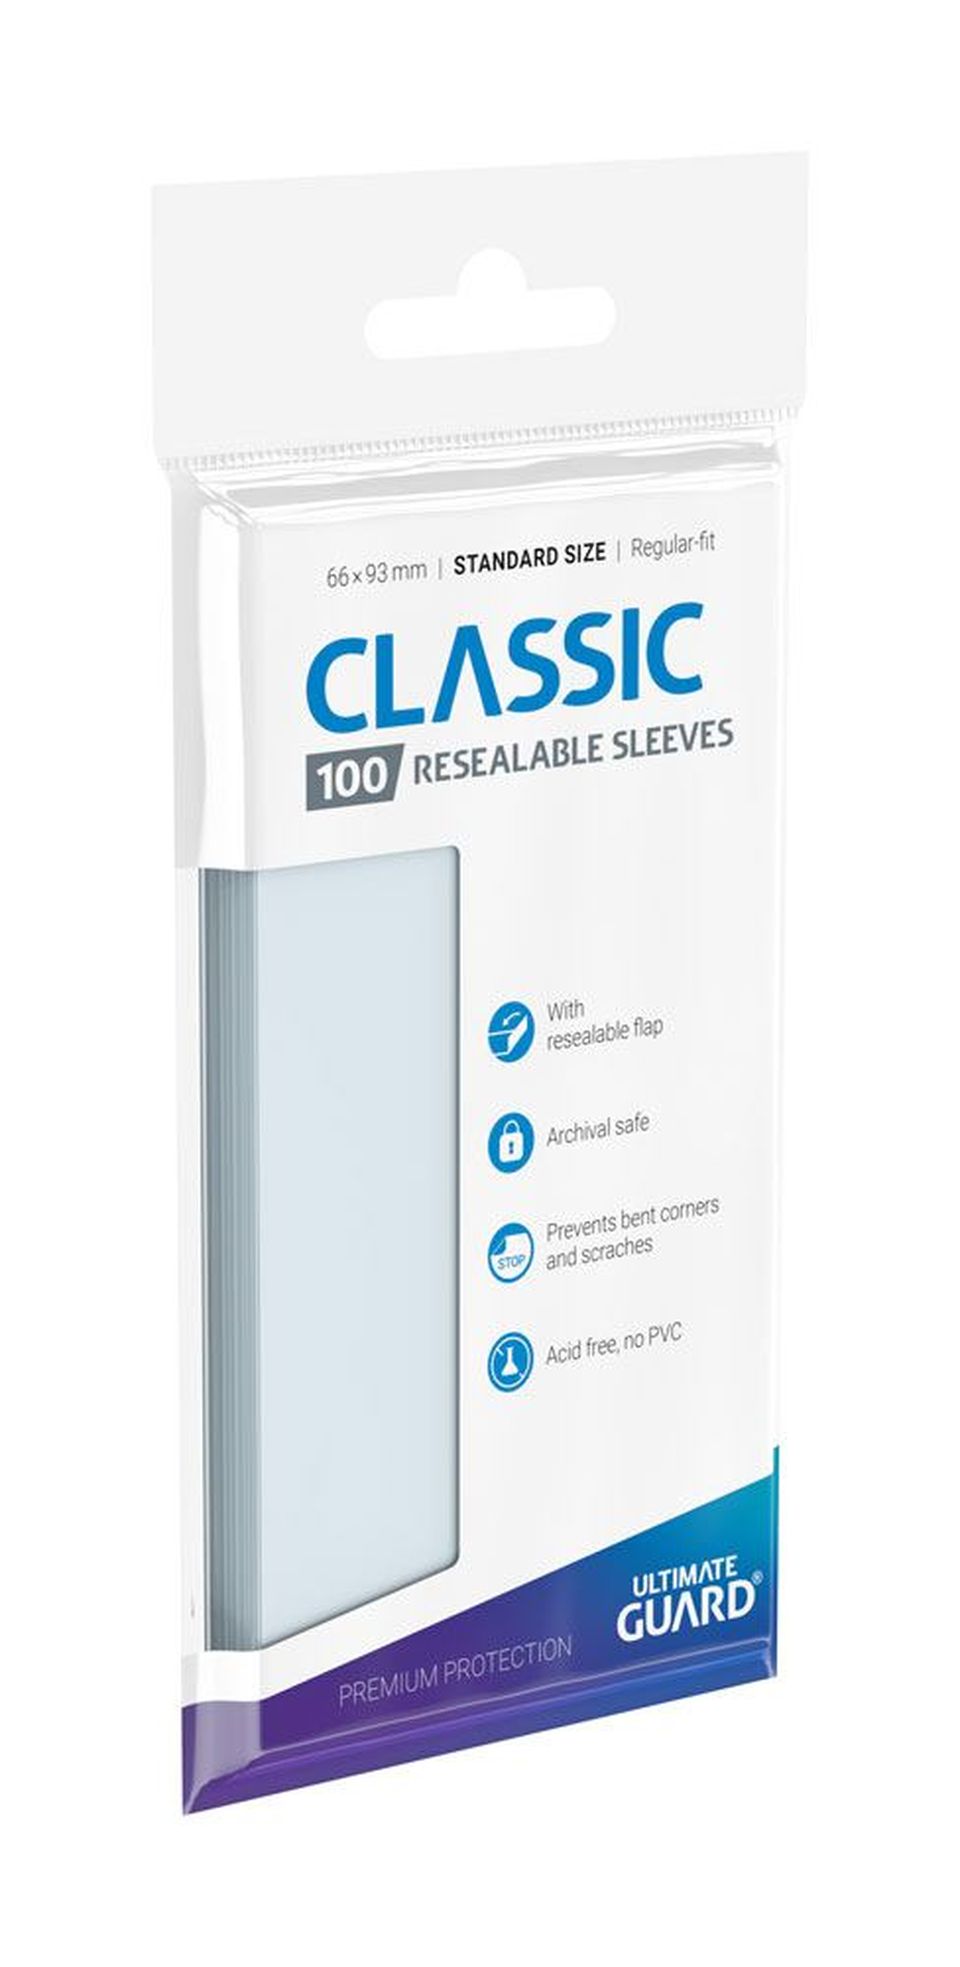 Protège-cartes : Classic Sleeves standard refermables (66 x 93 mm) image